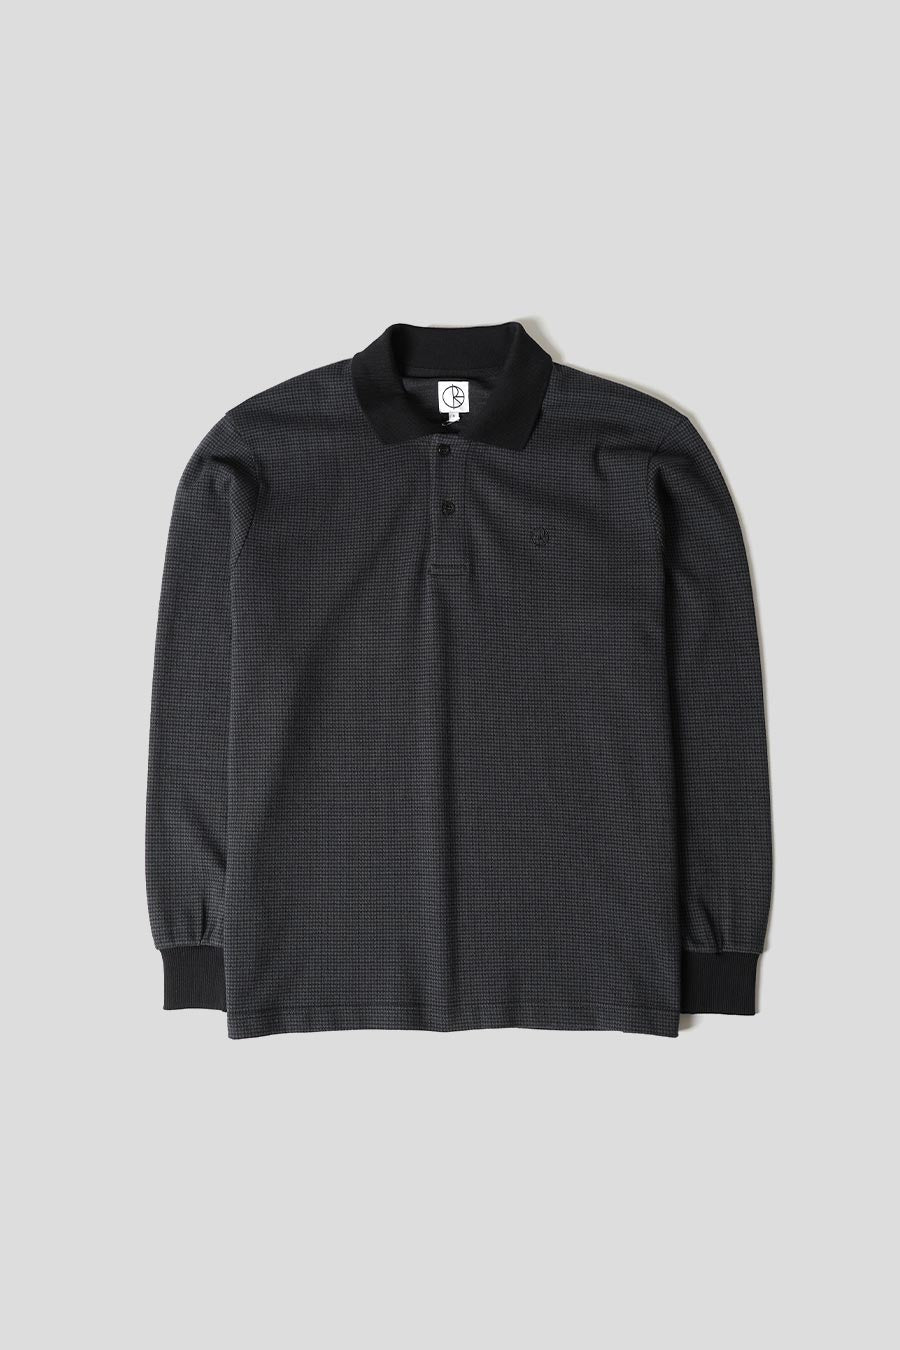 Polar Skate Co. - BLACK AND GREY HOUNDSTOOTH LONG-SLEEVED POLO SHIRT - LE LABO STORE